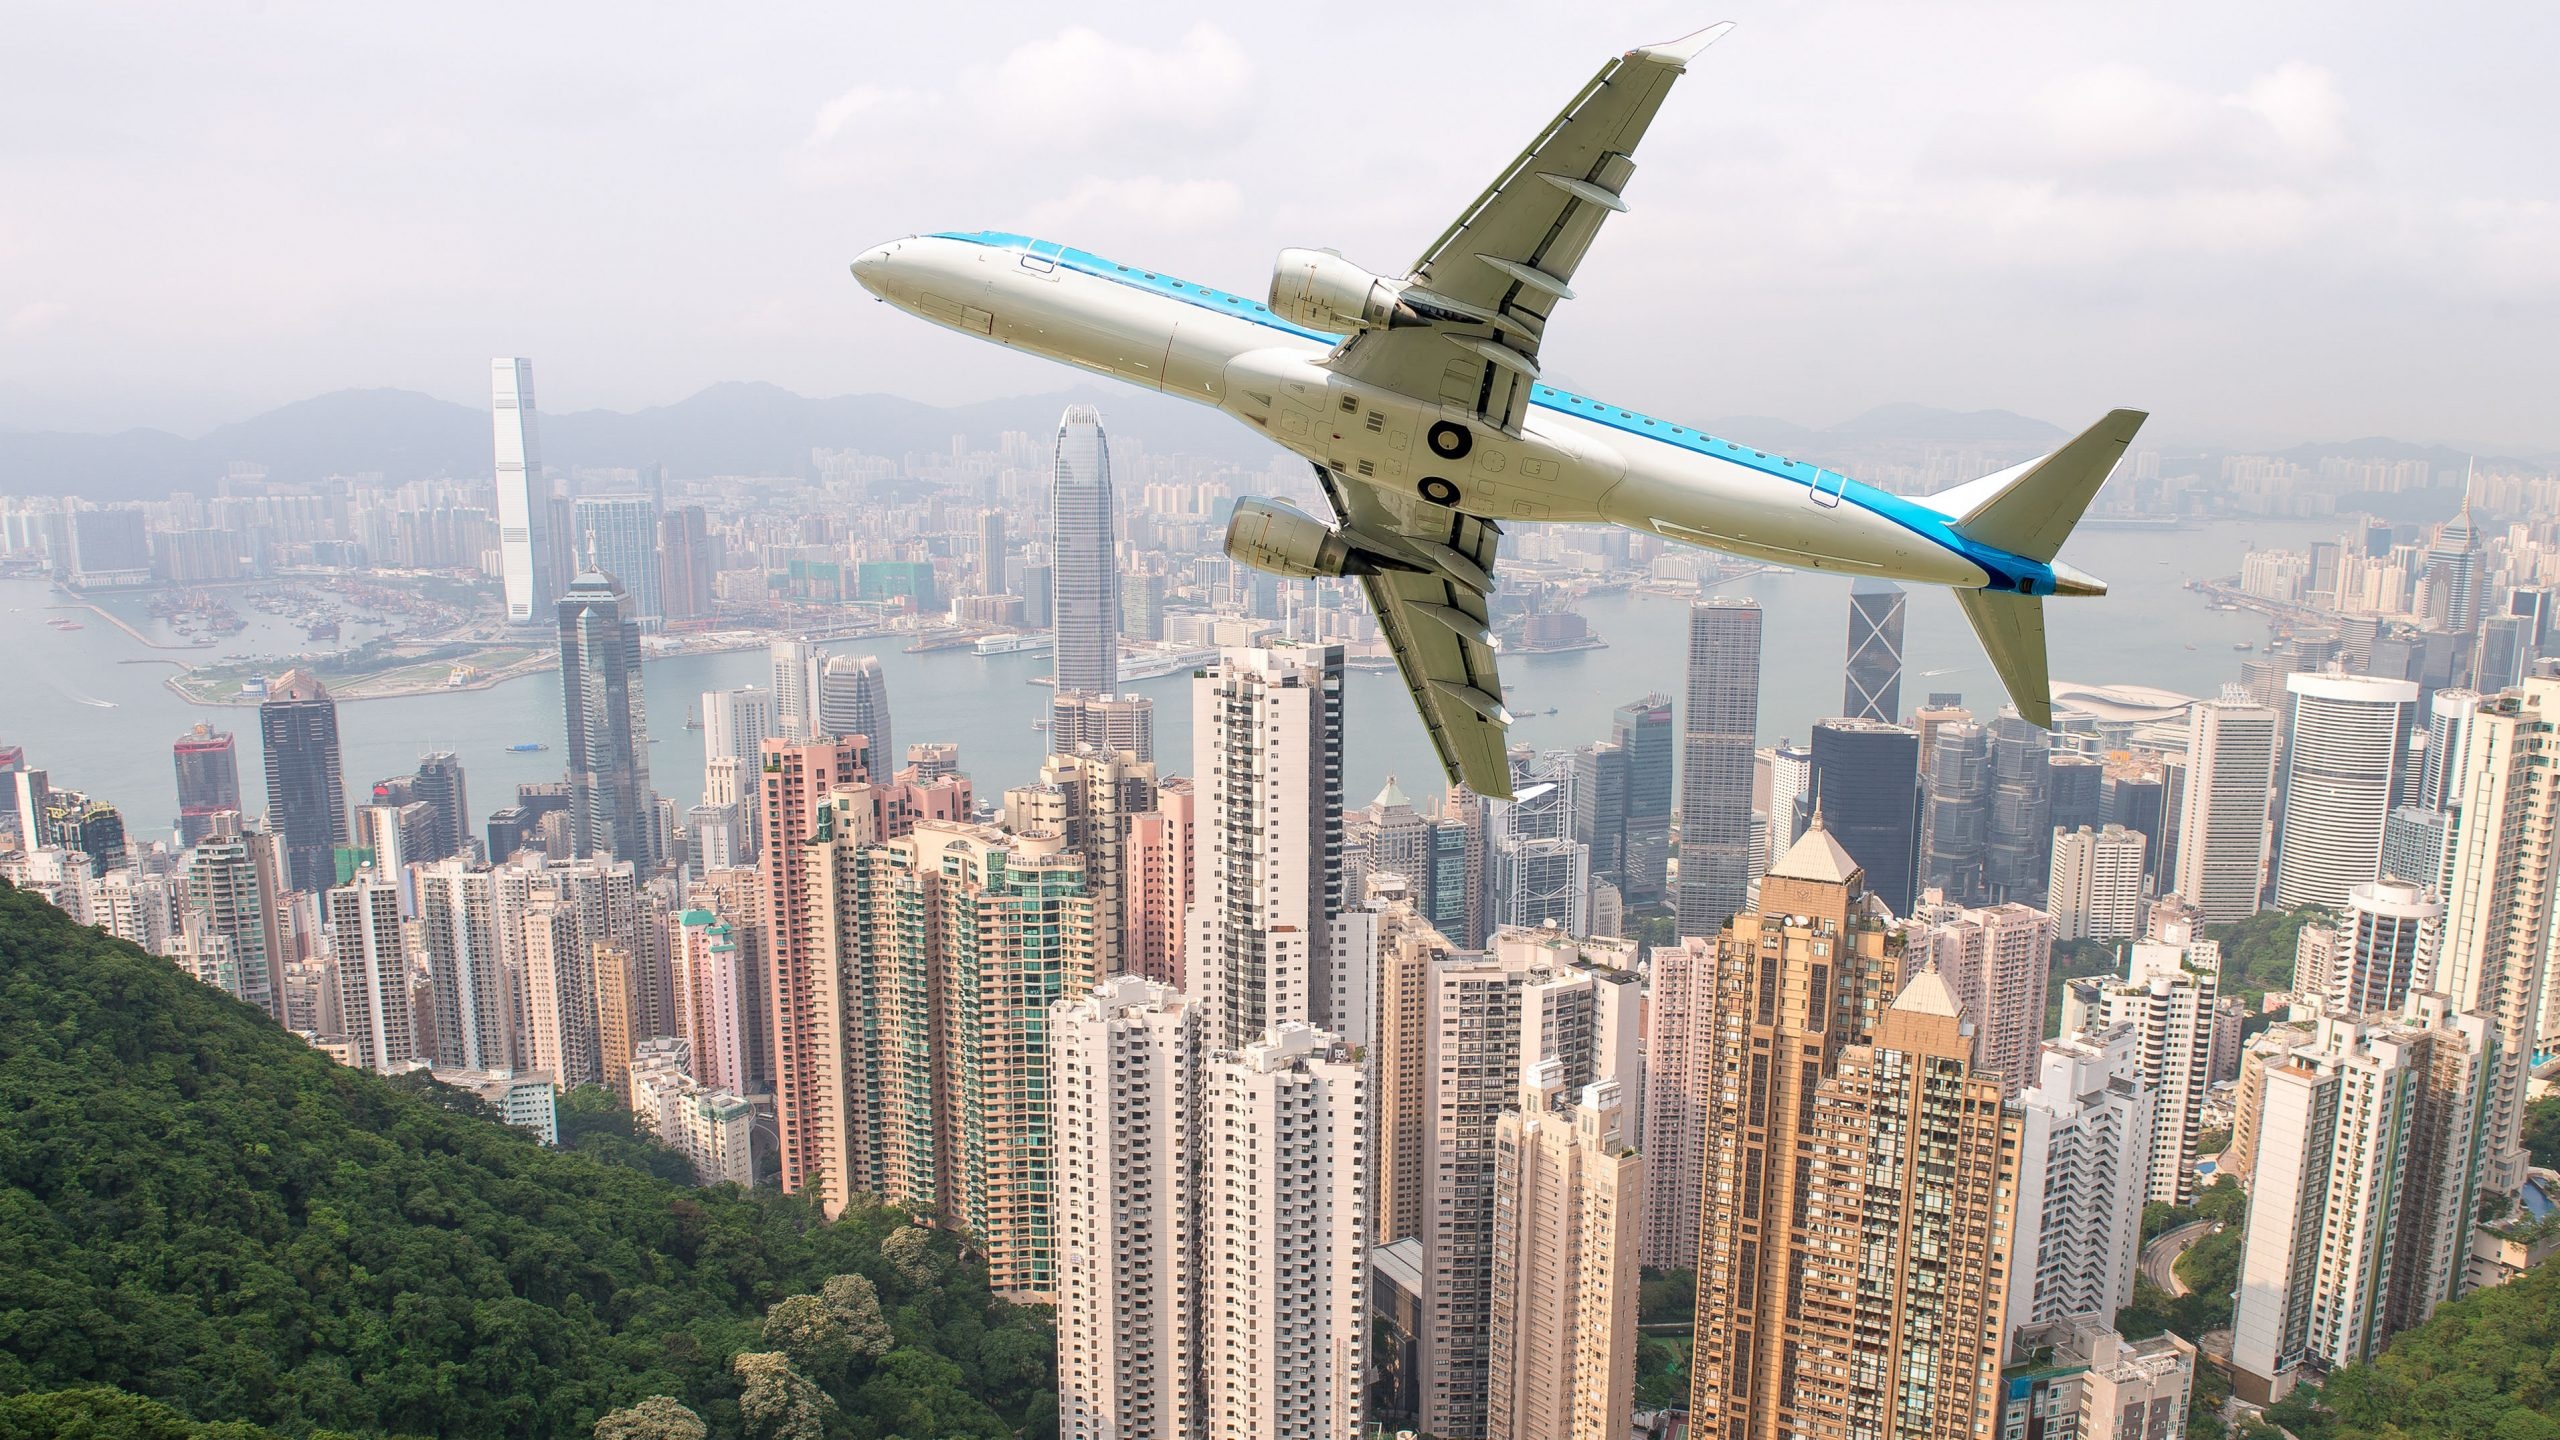 The city is giving away free flights next year to revive its battered visitor economy. But there are no expectations of a V-shaped rebound. Photo: Shutterstock